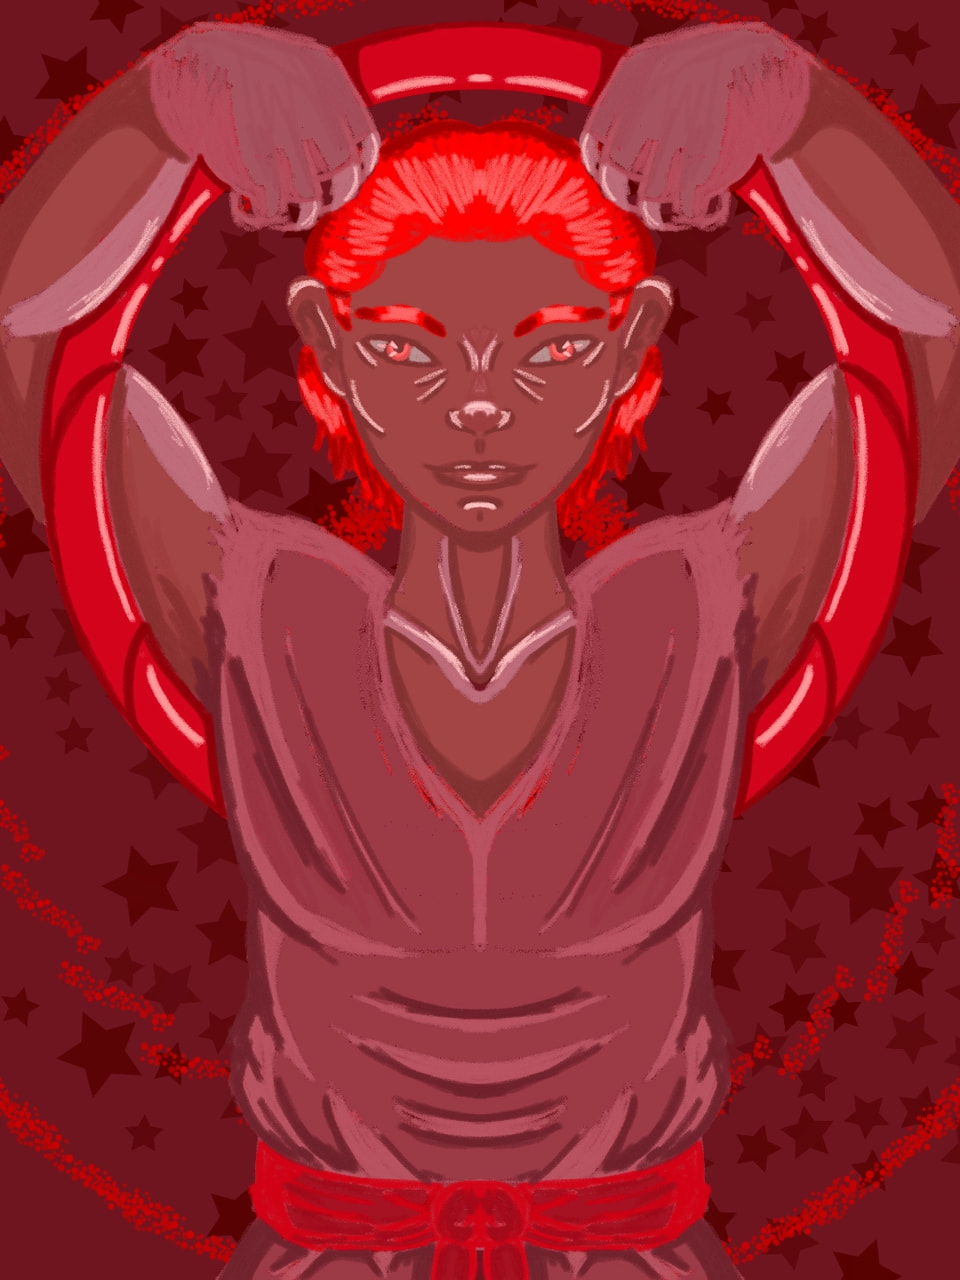 #Redchallenge #colorweek #male #sonysketch umm whatever. Started drawing and this came out, so dunno!